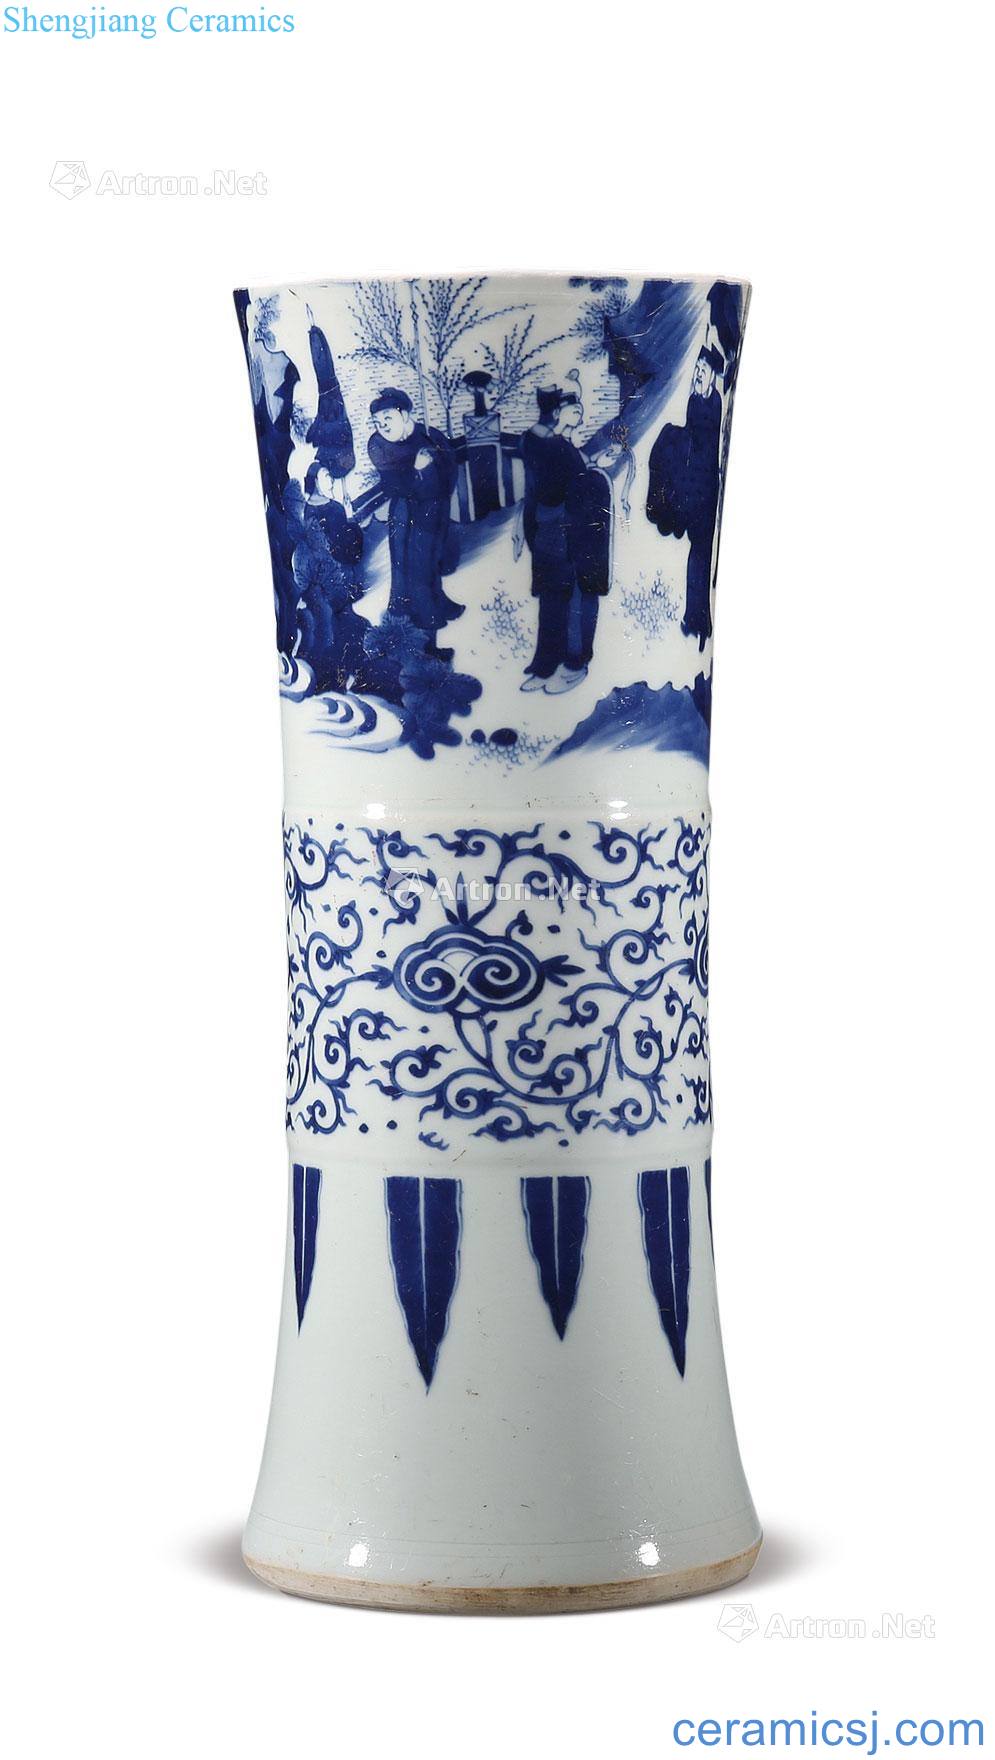 Ming chongzhen Story lines flower vase with blue and white characters